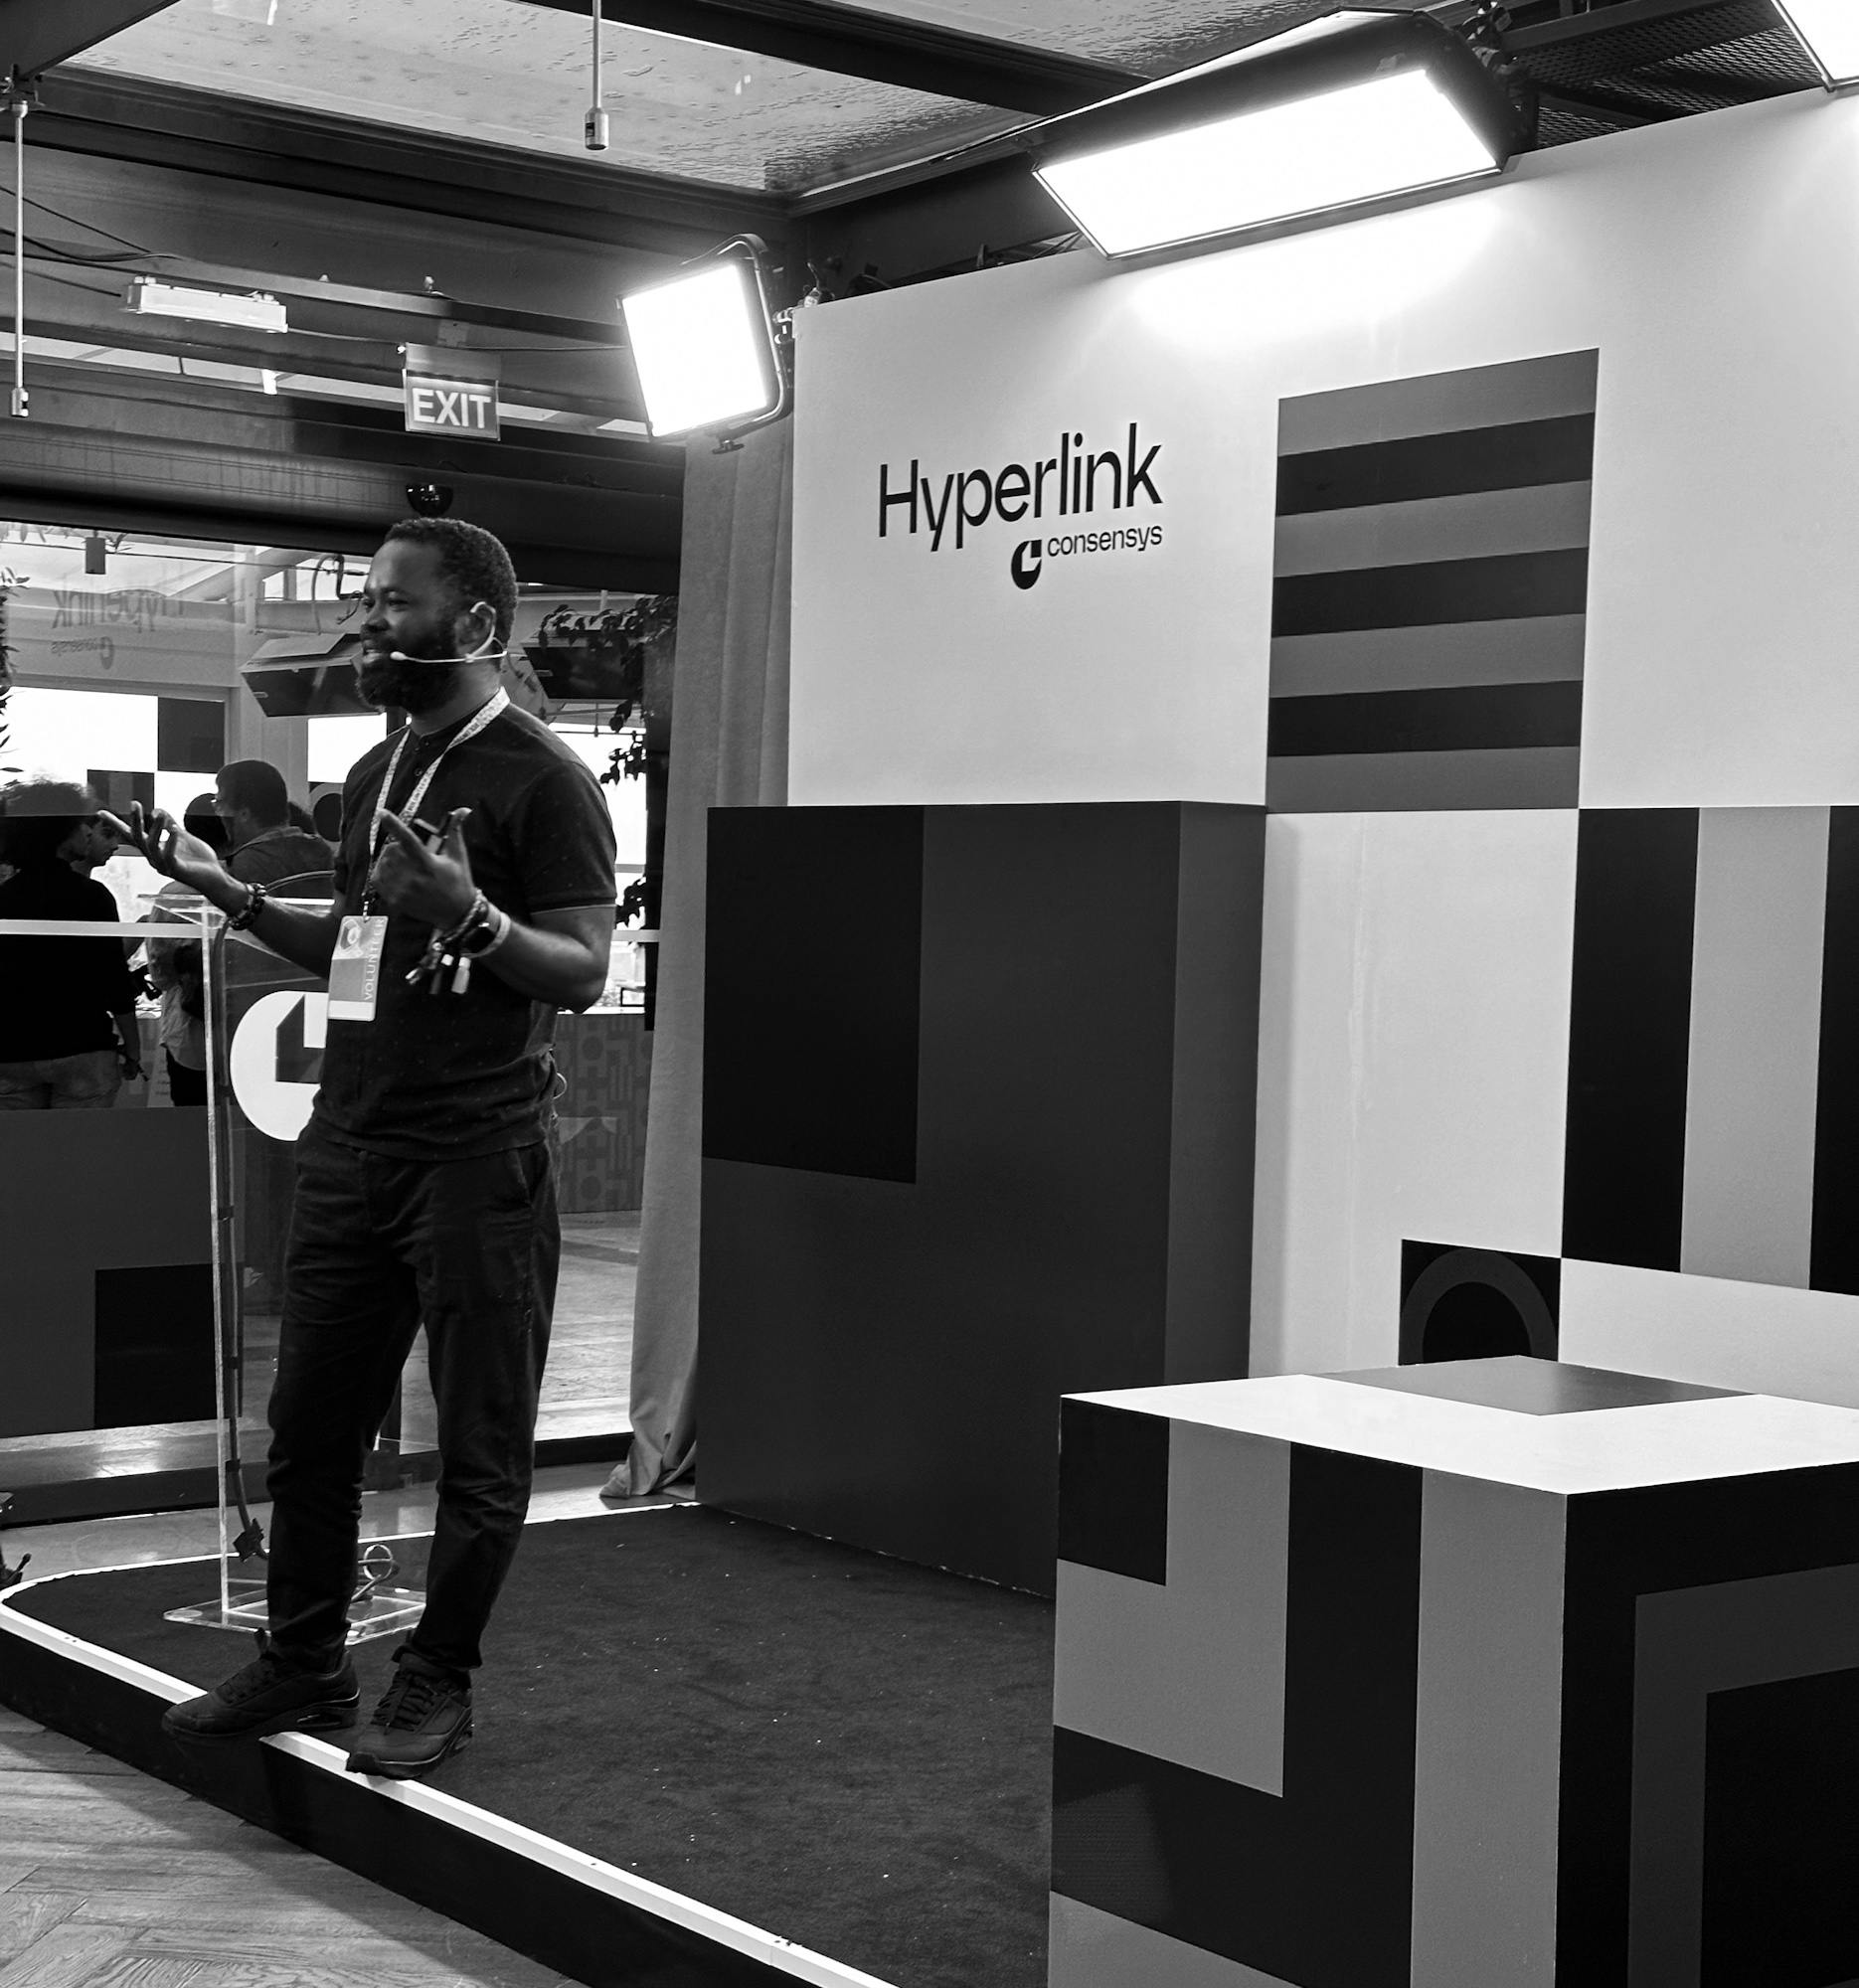 Eric Annan, Founder of AyaHQ and Consensys Vanguard Ambassador gives a talk at our Hyperlink activation and shares his passion for supporting communities throughout Africa. 